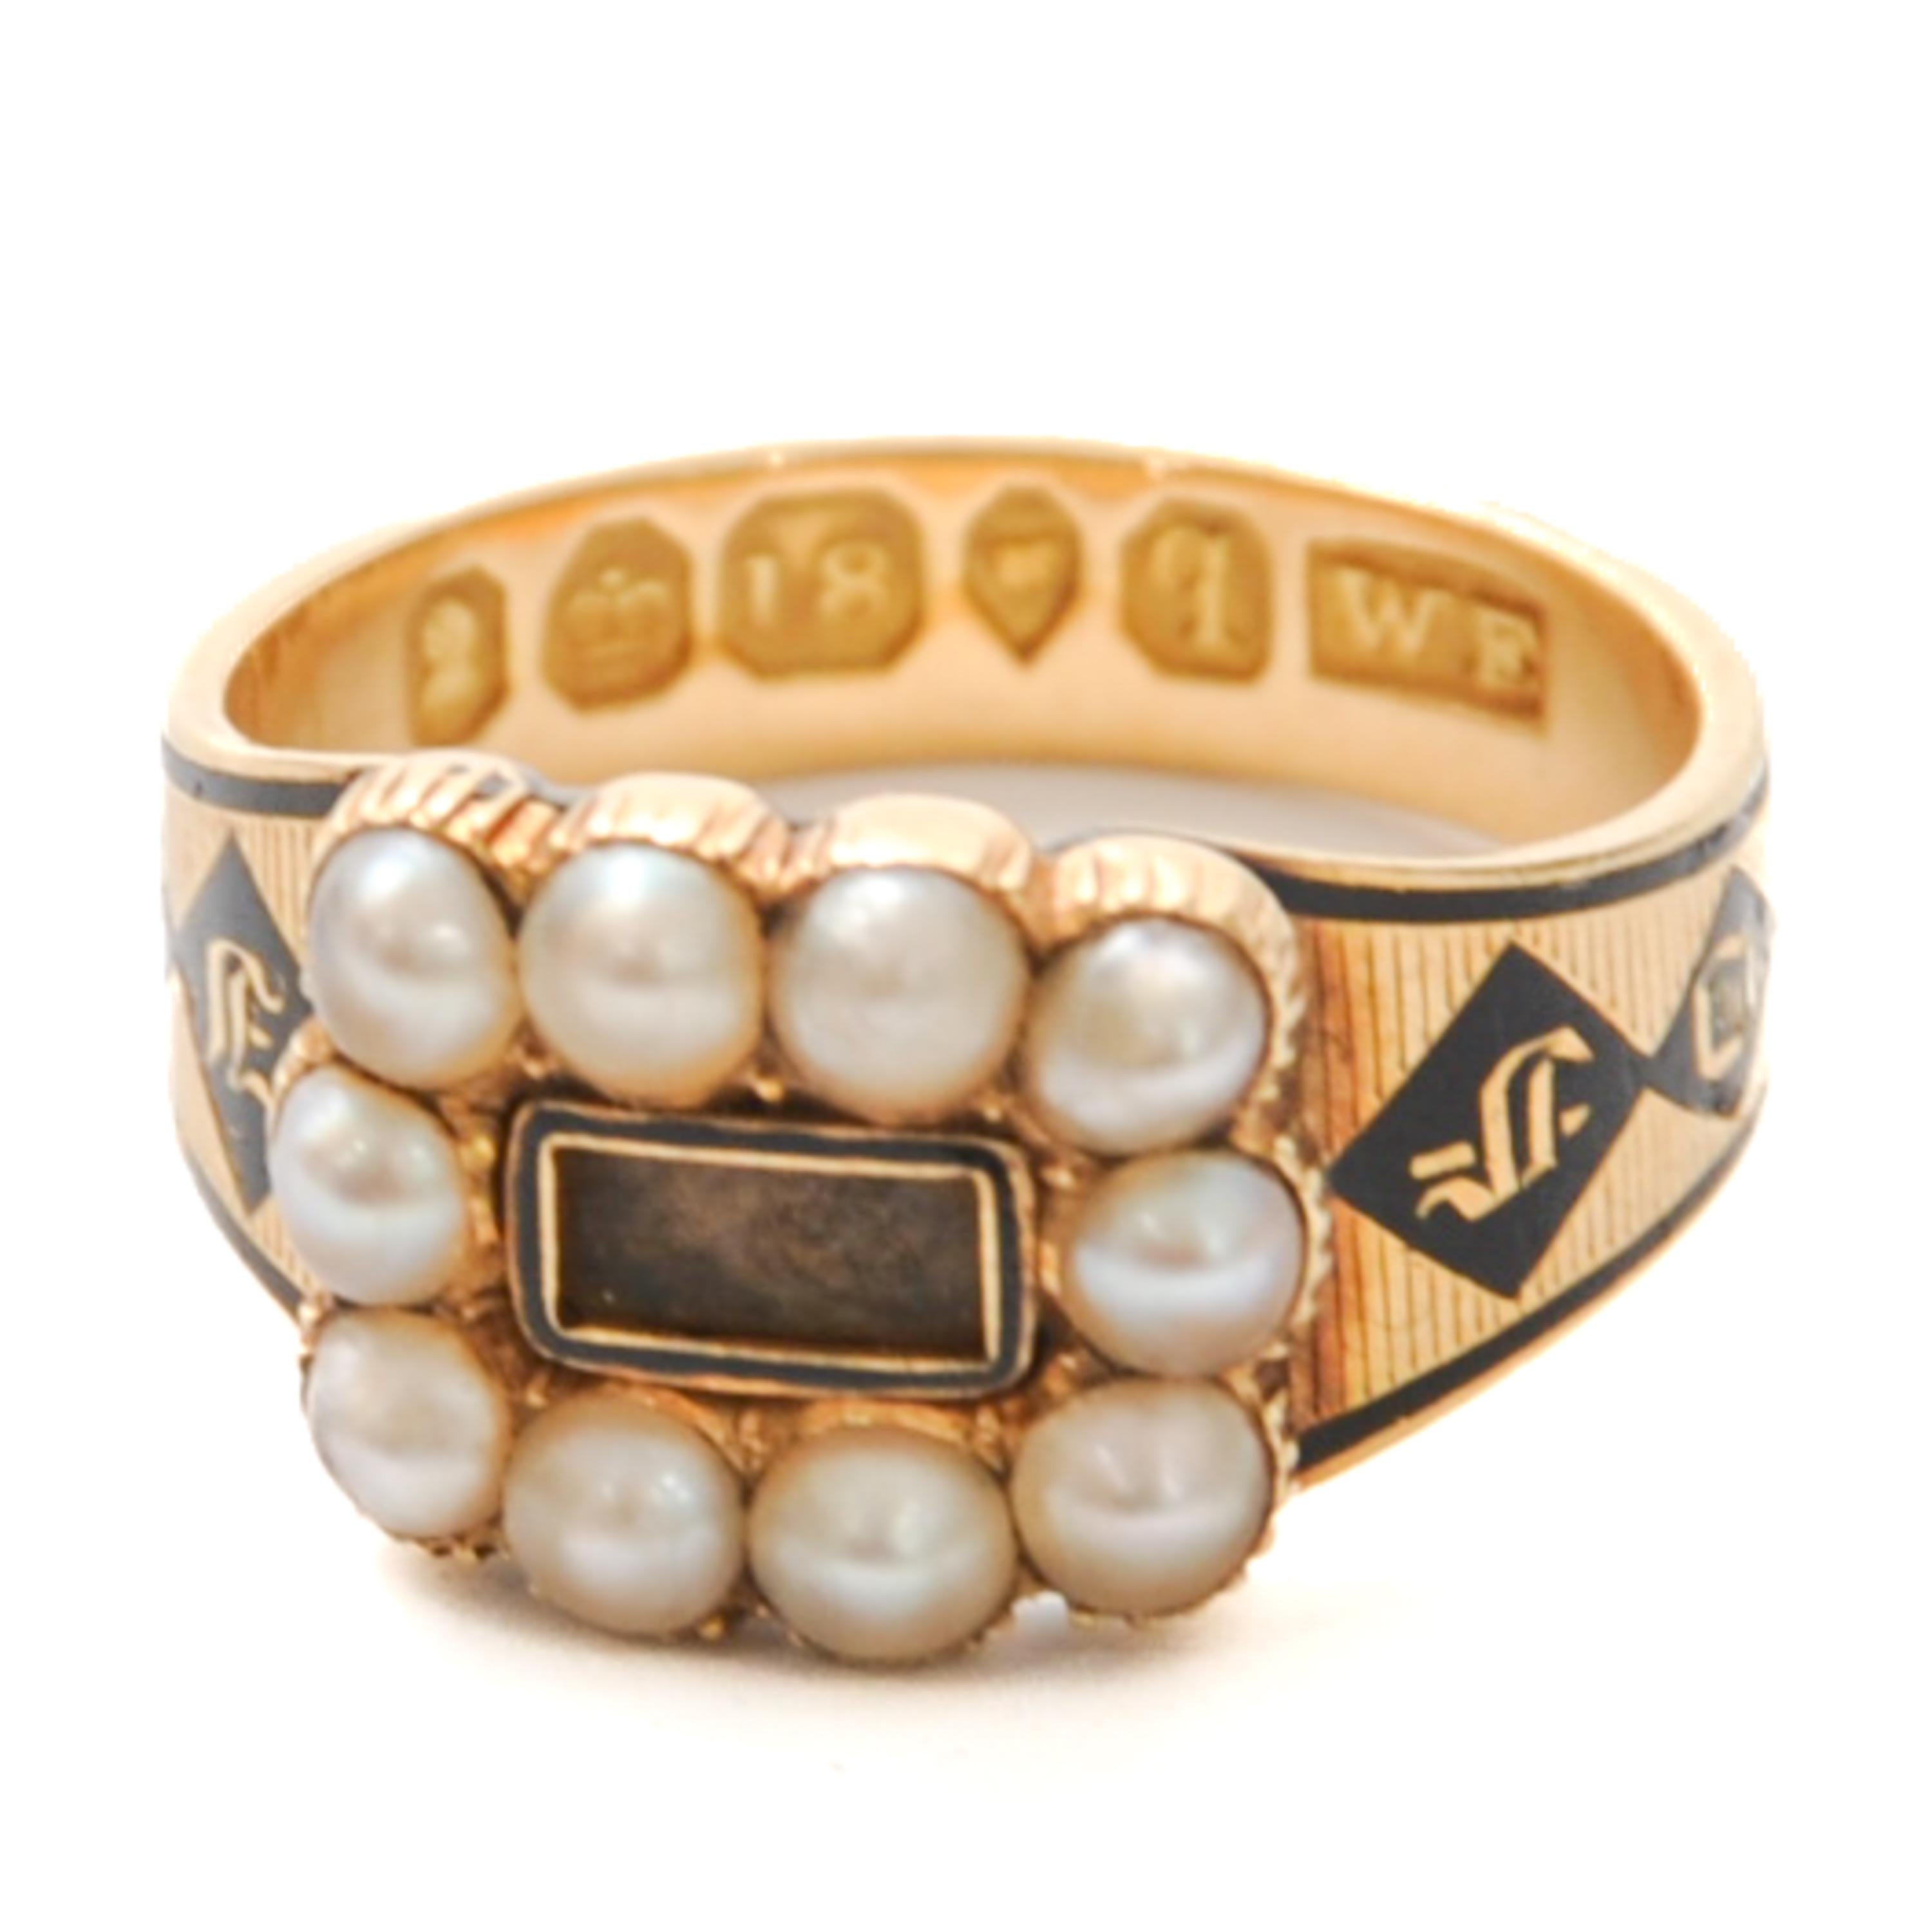 Antique English 18K Gold Memorial Ring from 1831 with Pearls and Black Enamel For Sale 1